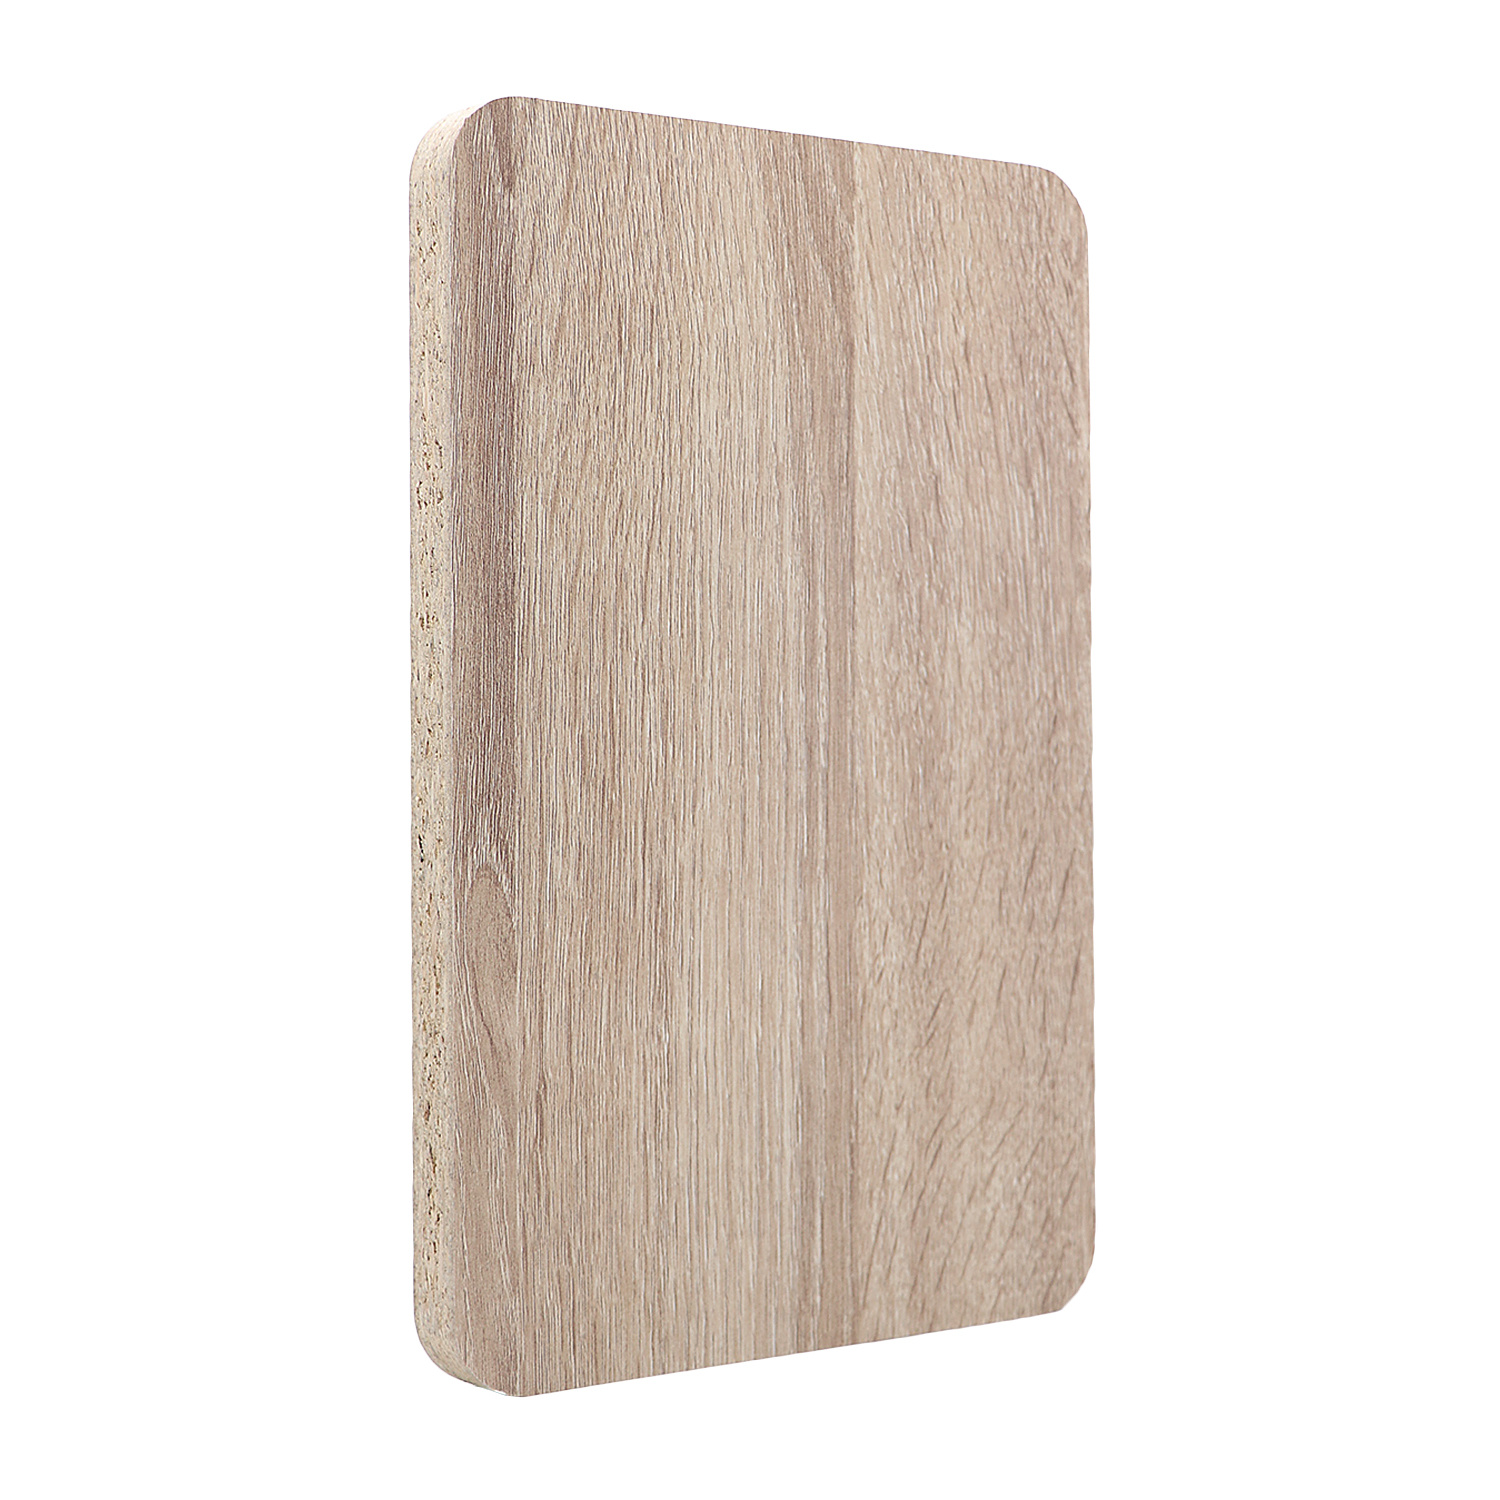 White Melamine Faced Particle Board